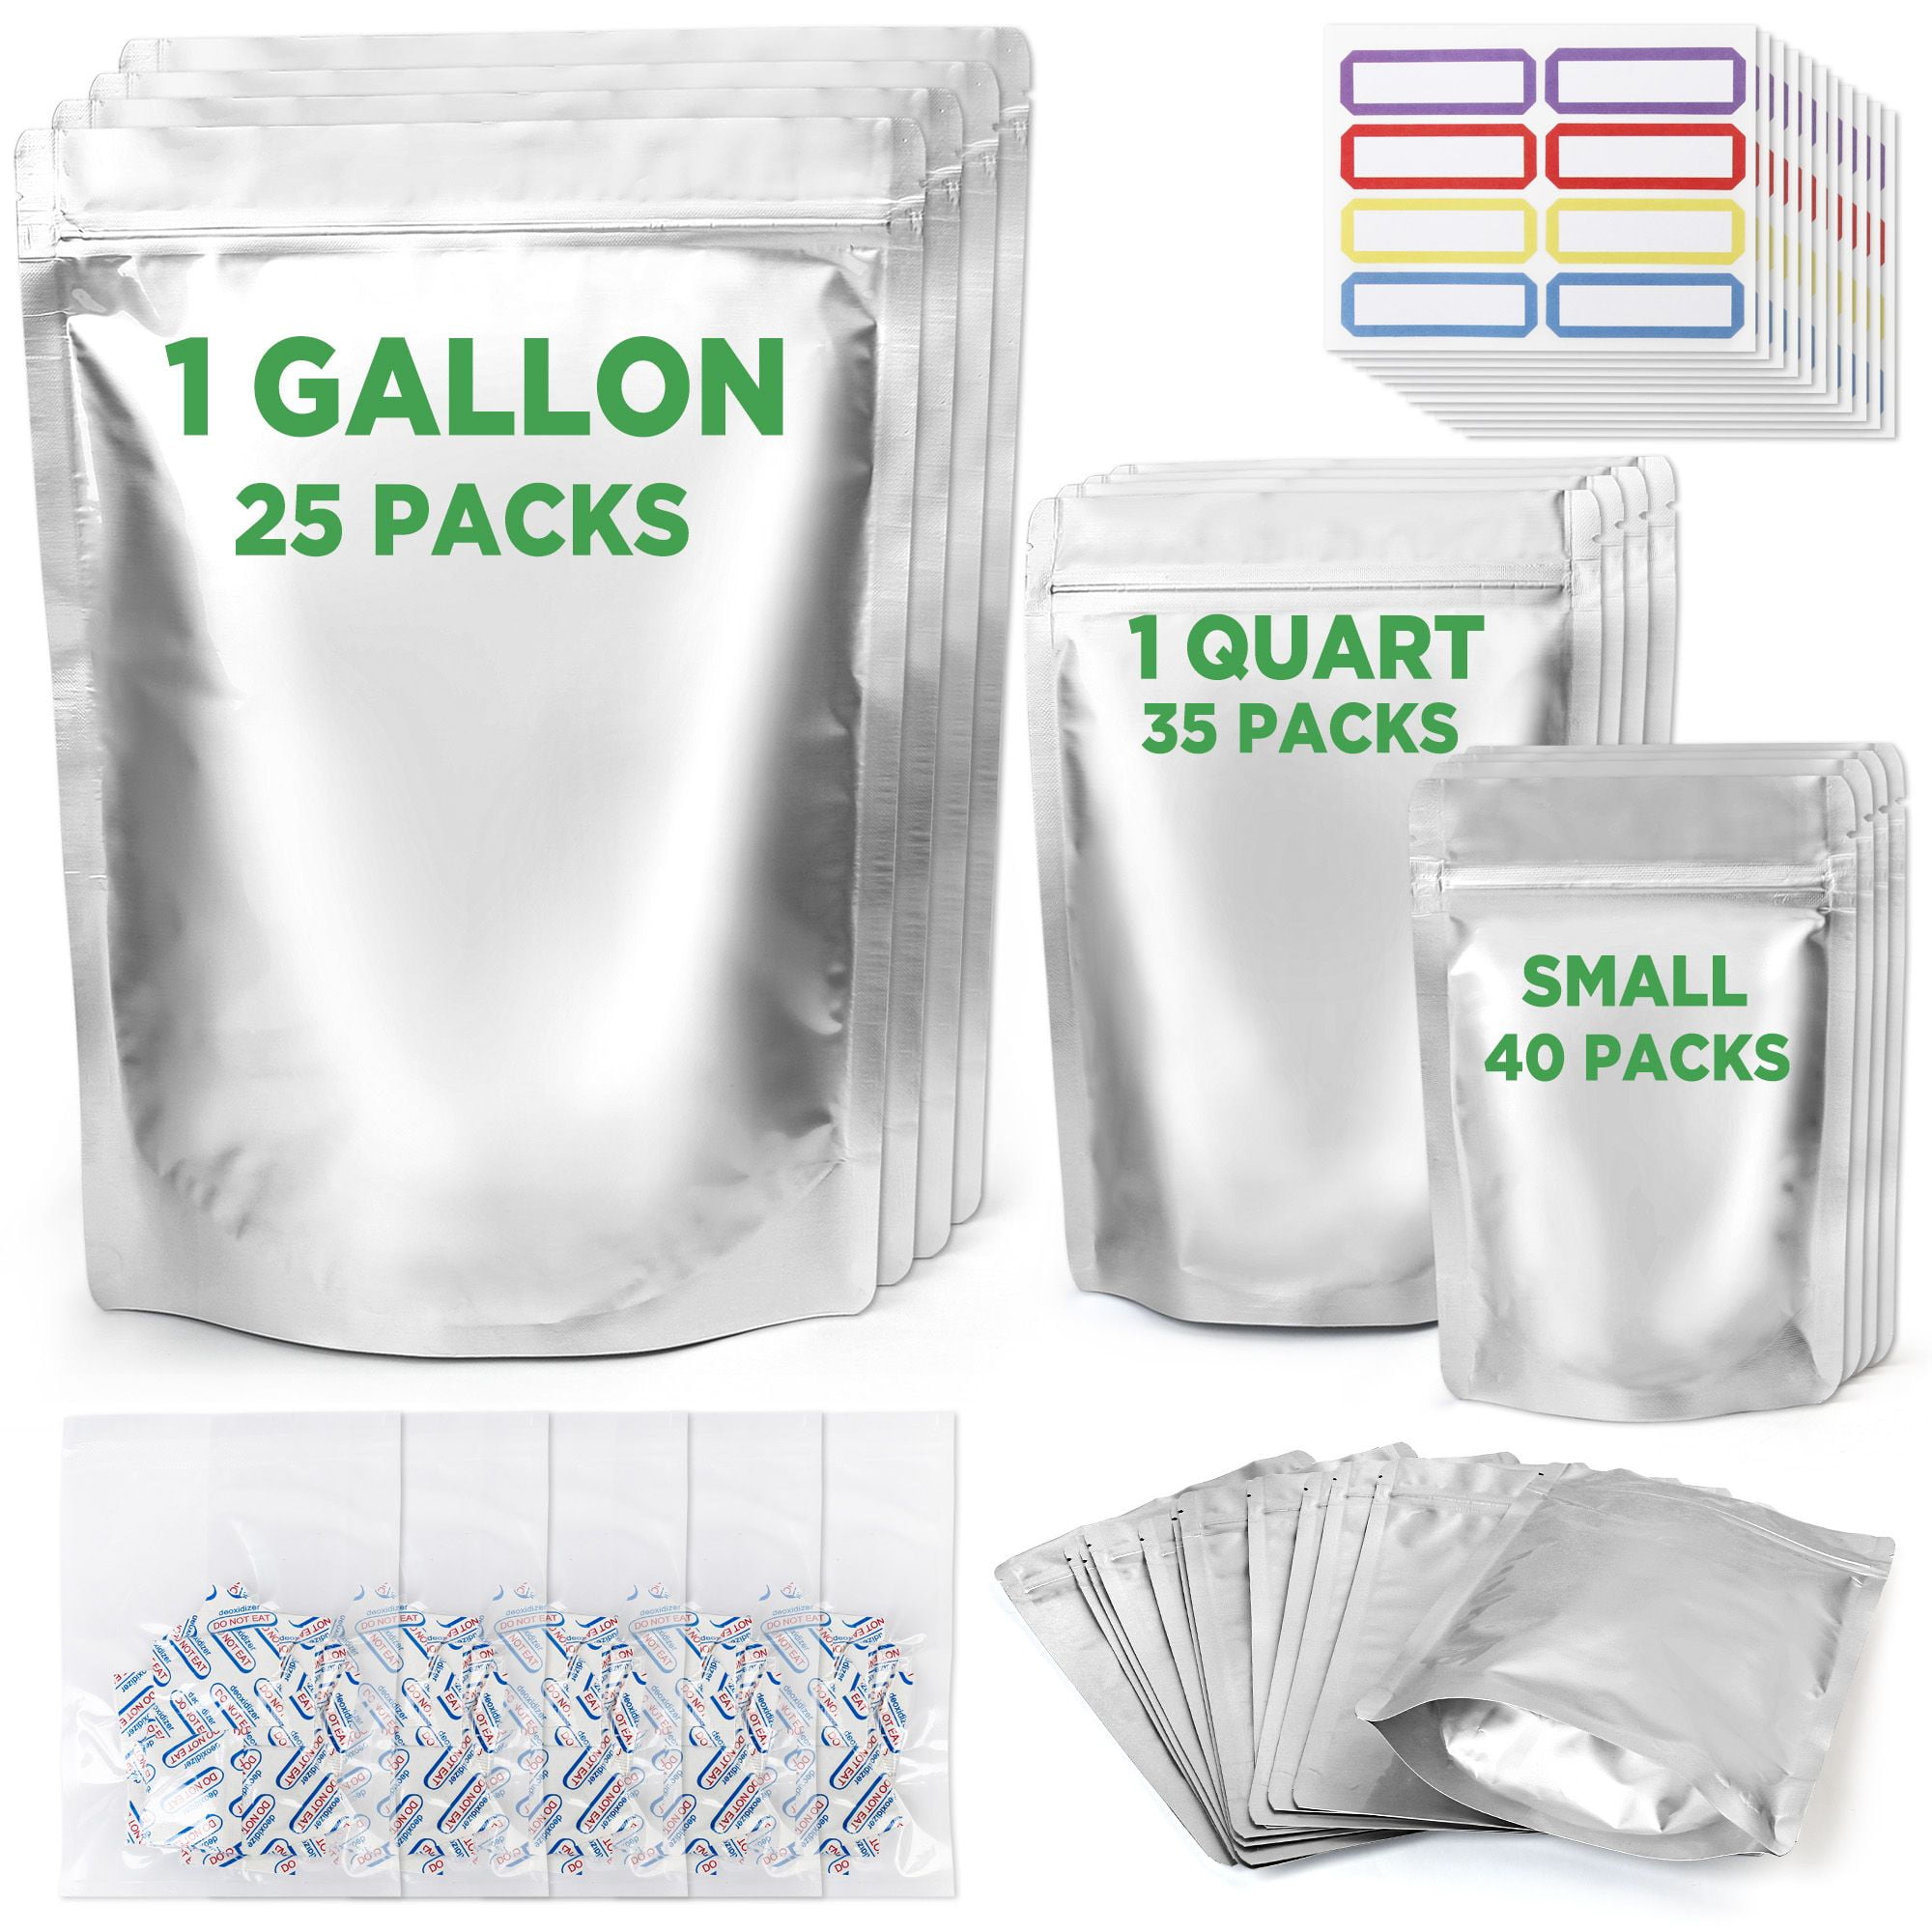 30pcs Mylar Bags for Food Storage with Oxygen Absorbers - Extra Thick 14.8 Mil - 1 Gallon Ziplock Resealable Mylar Bags with Oxygen Absorbers 500cc